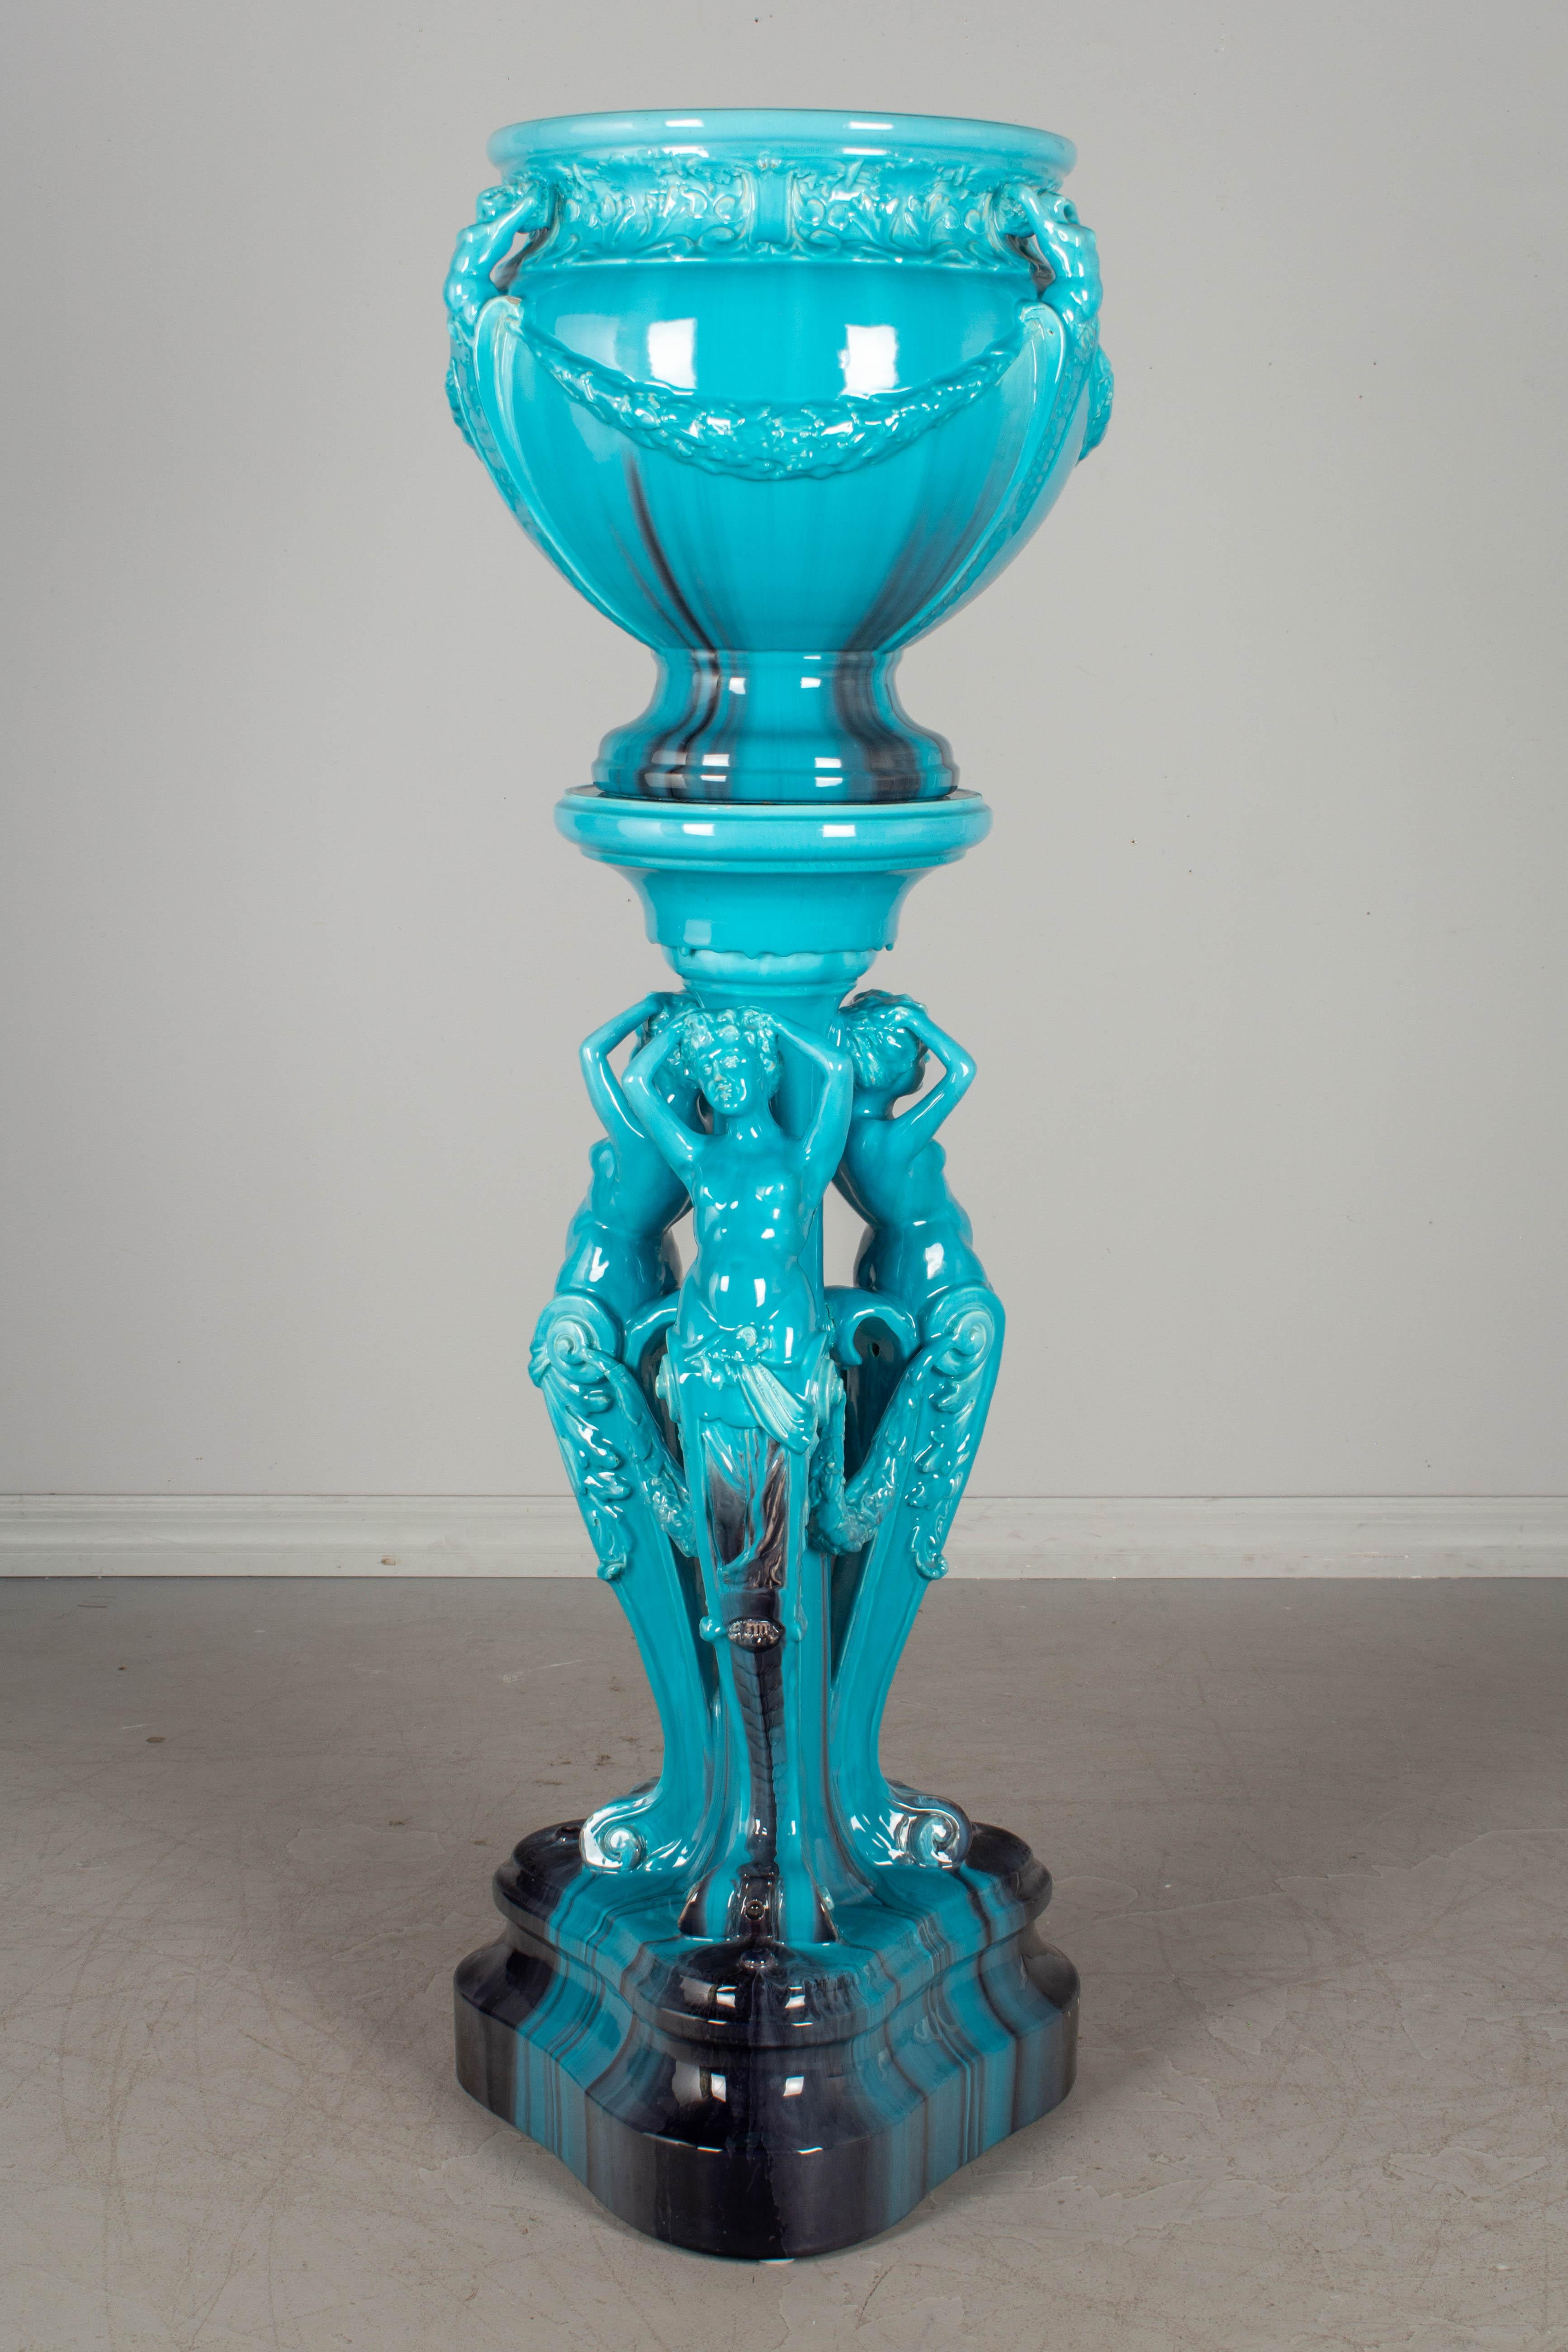 A French Art Nouveau Vallauris Majolica ceramic jardinière by Jerome Massier. Triangular pedestal base with three nude figures surmounted by a large bowl form planter with nudes and floral swags. Bright turquoise and deep purple glaze. In excellent